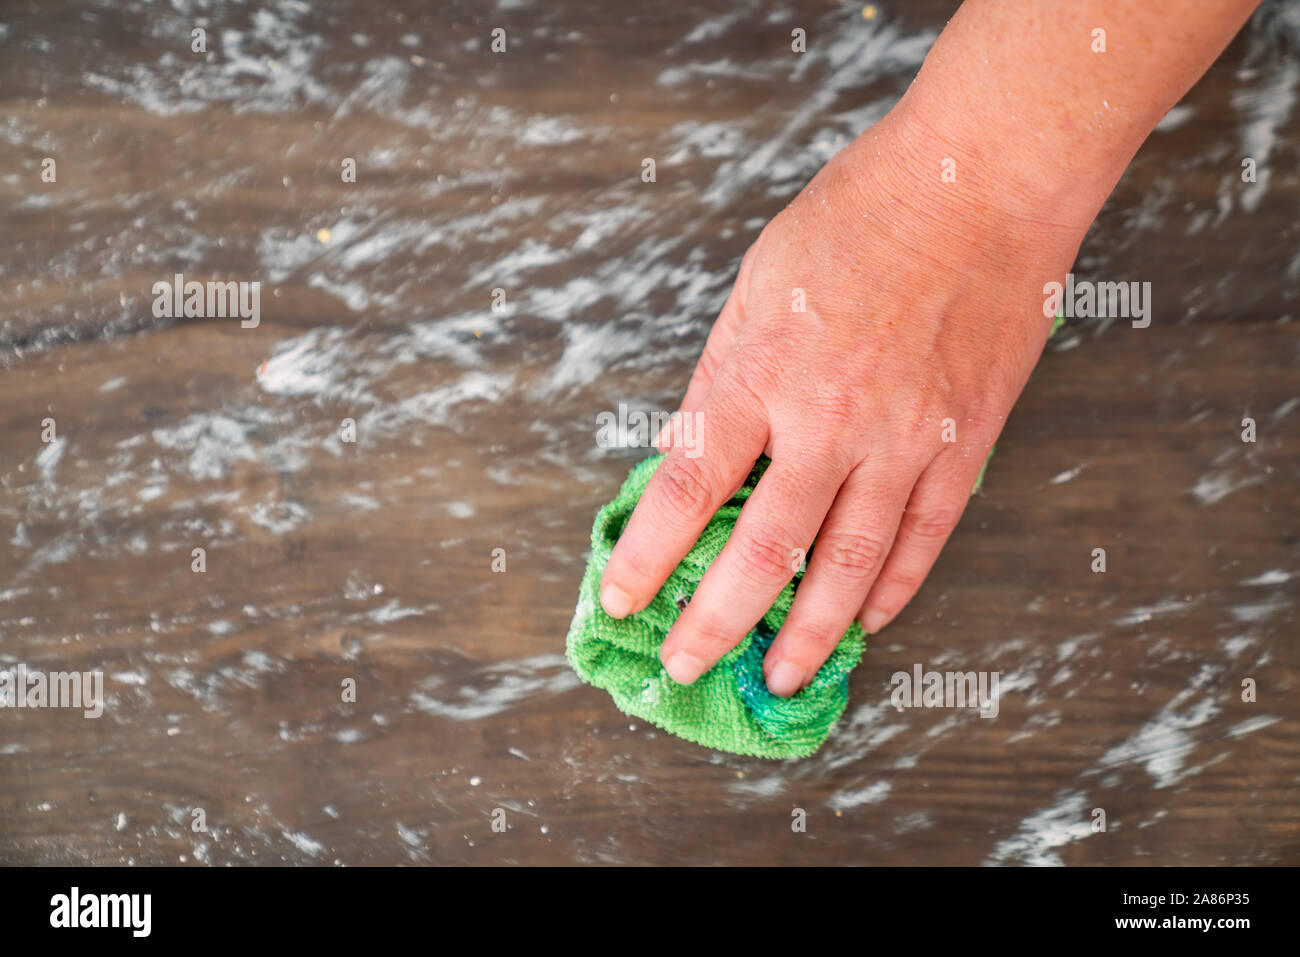 Woman is wiping the dirty glass surface for hygiene. Stock Photo